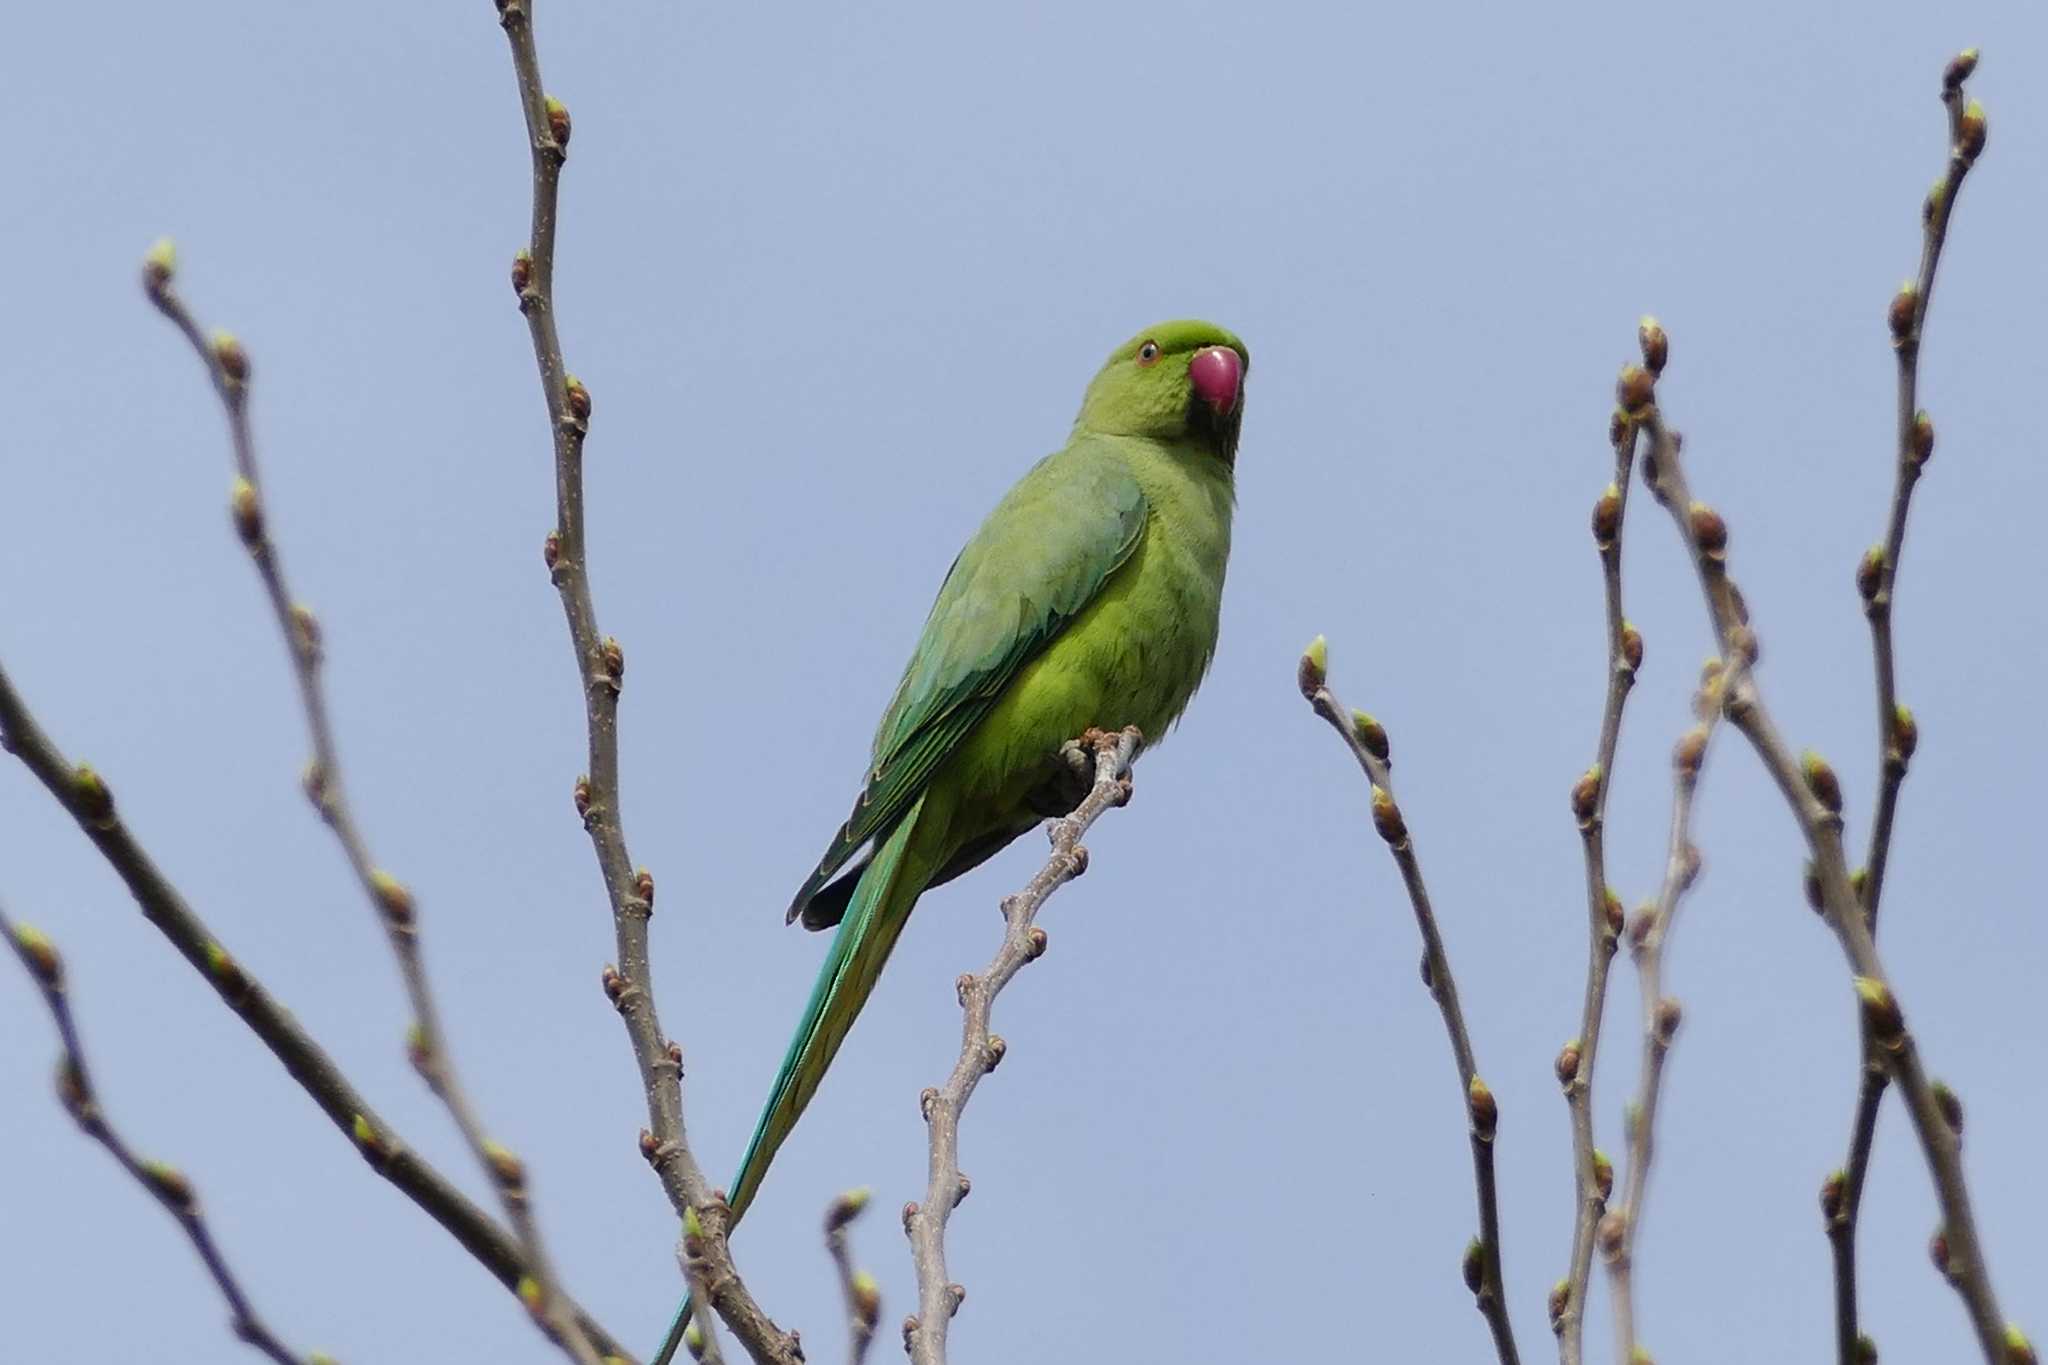 Photo of Rose-ringed Parakeet at 東京都 by アカウント5509